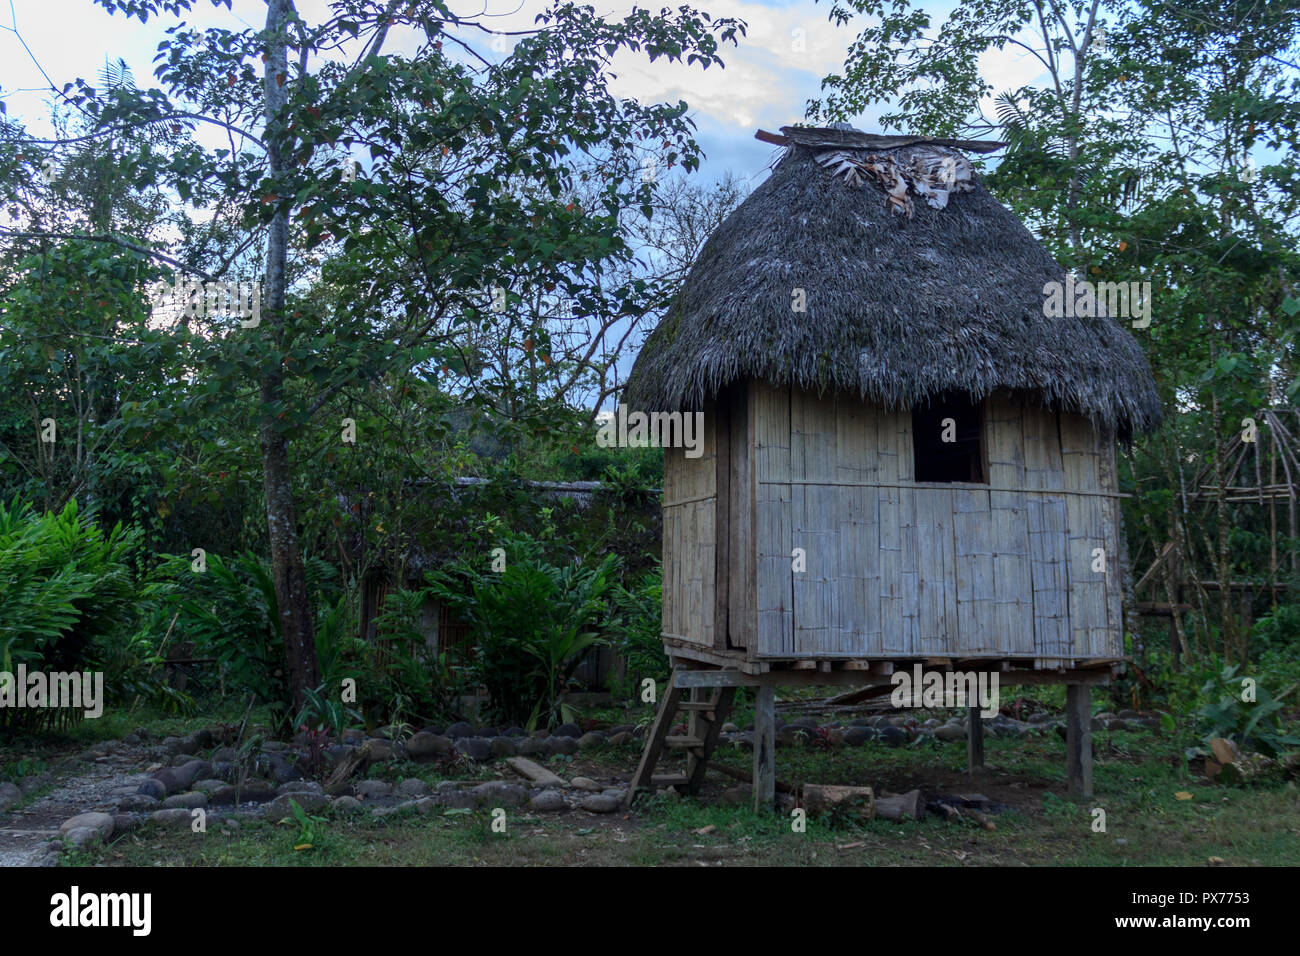 indigenous house from wood in the amazon rainforest, ecuador Stock Photo